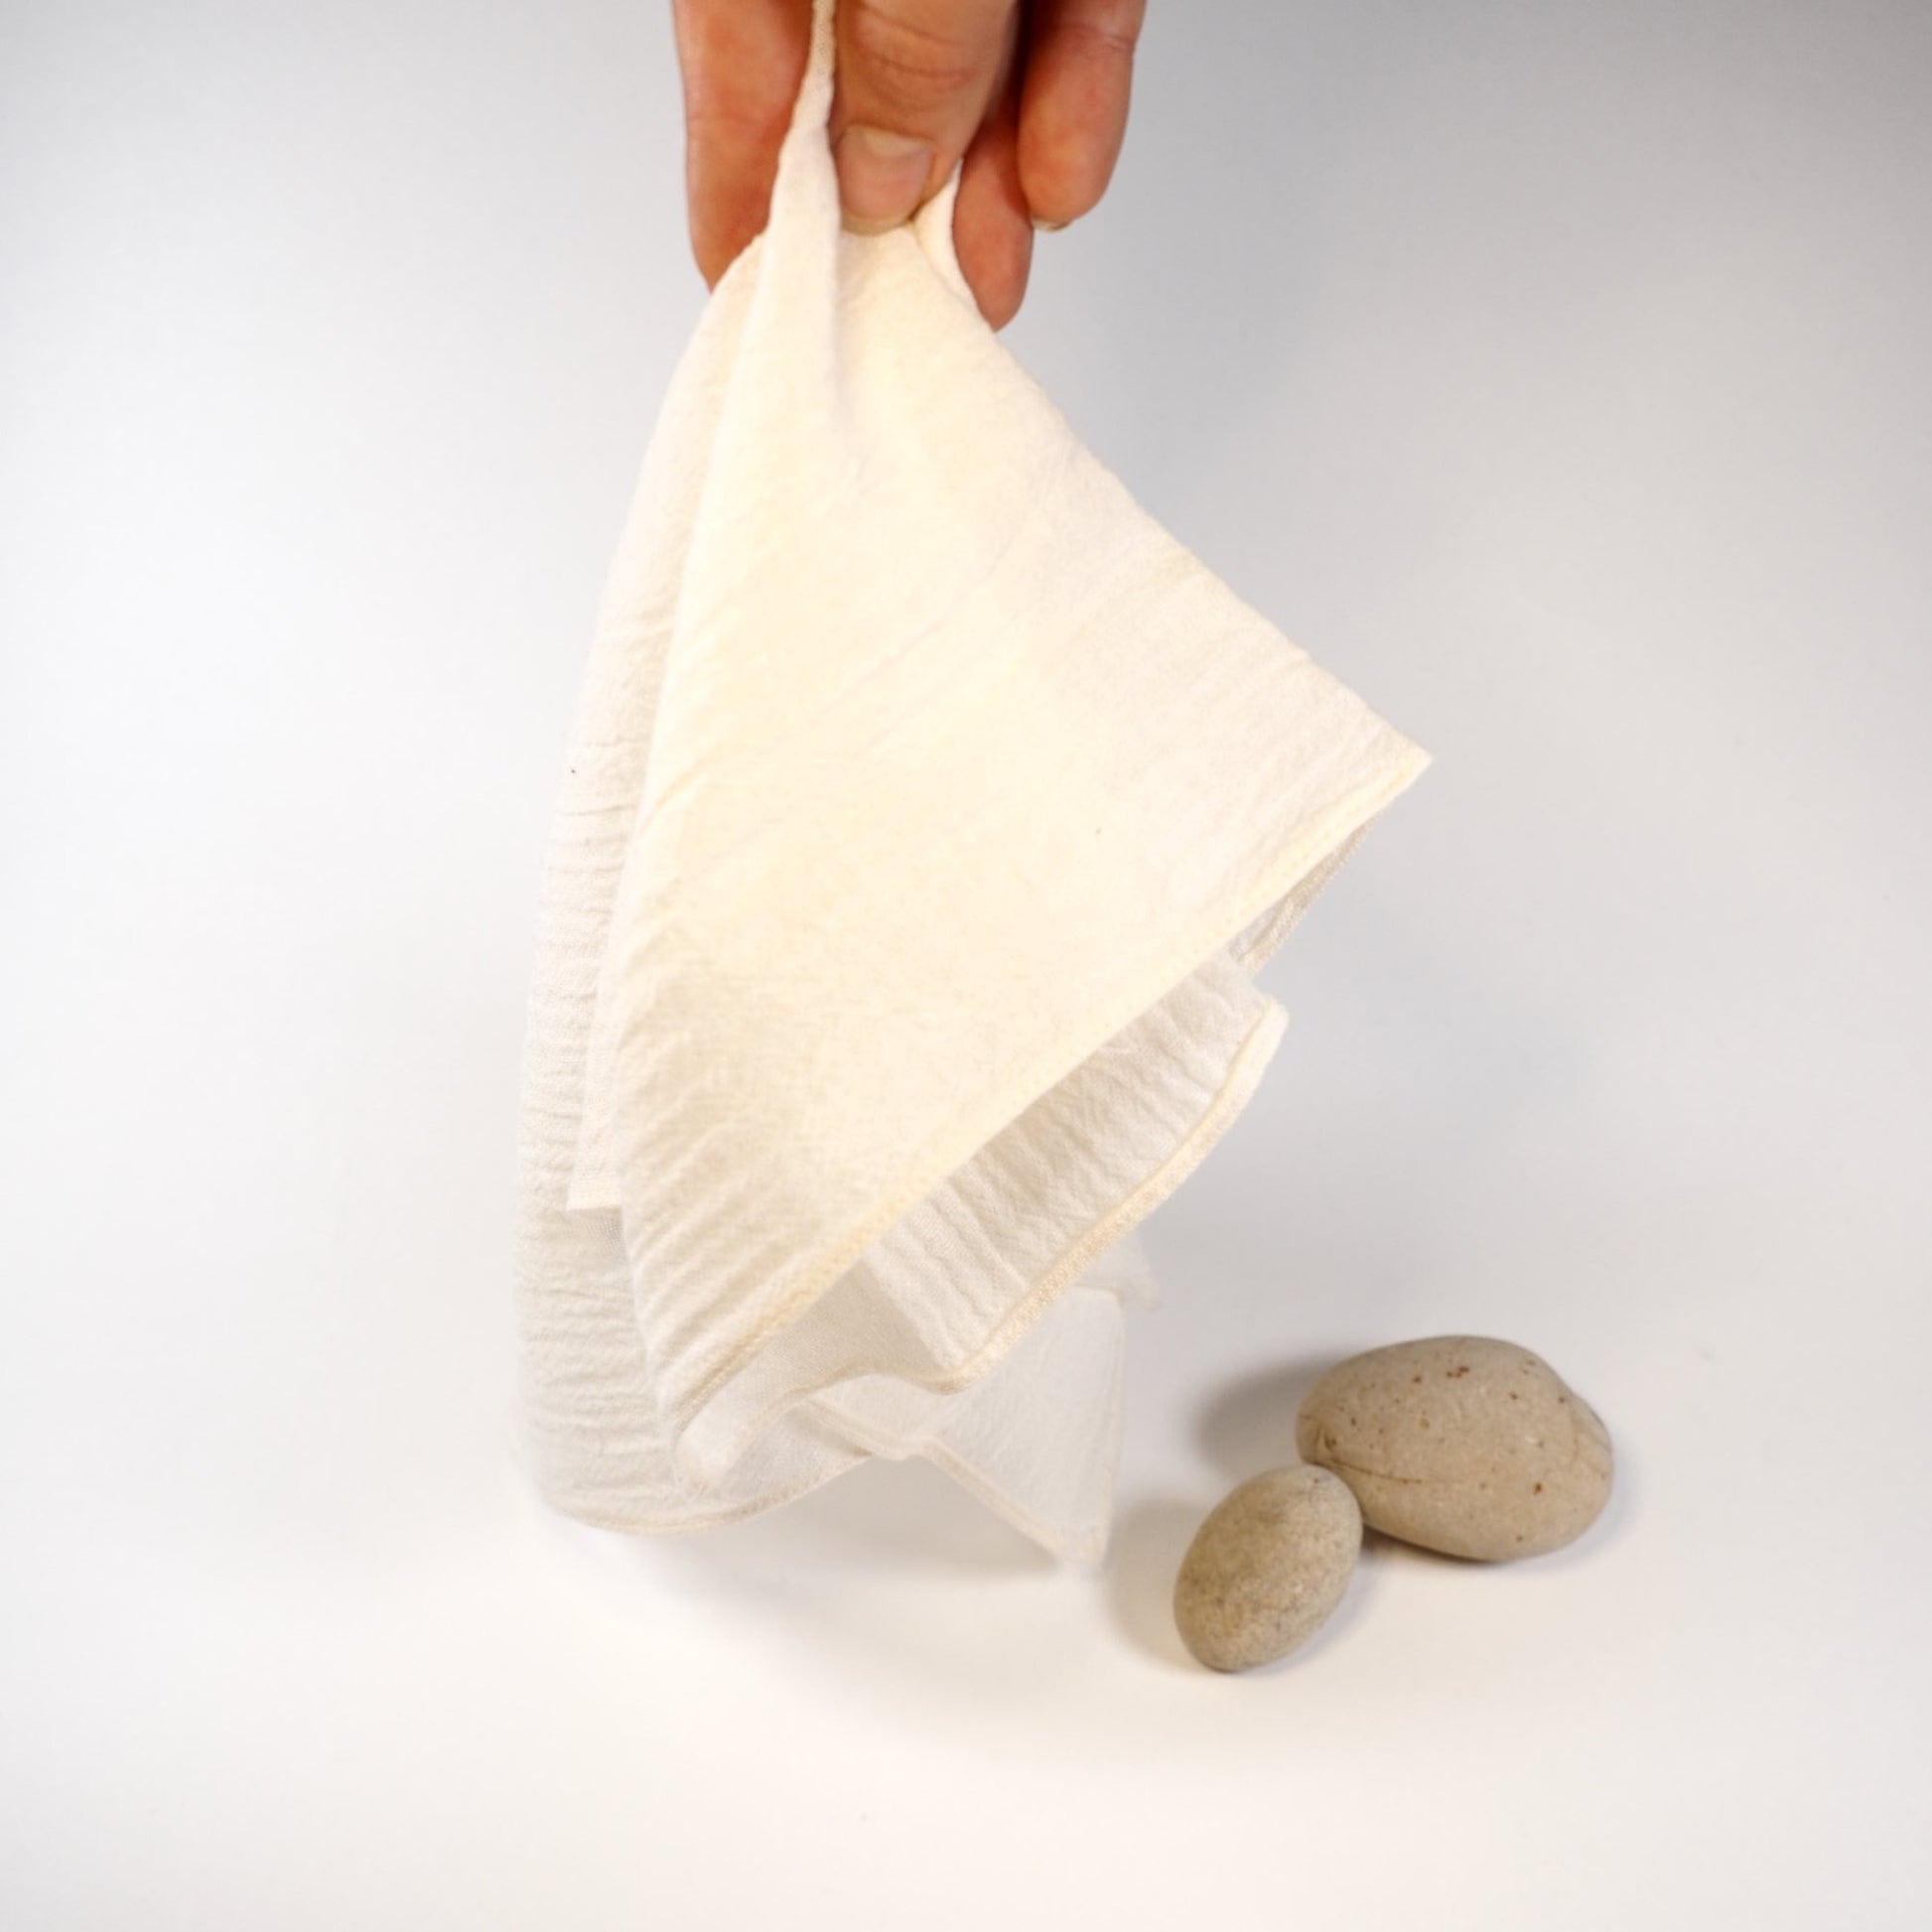 Hands holding a soft, organic cotton muslin facecloth for everyday gentle cleansing, 